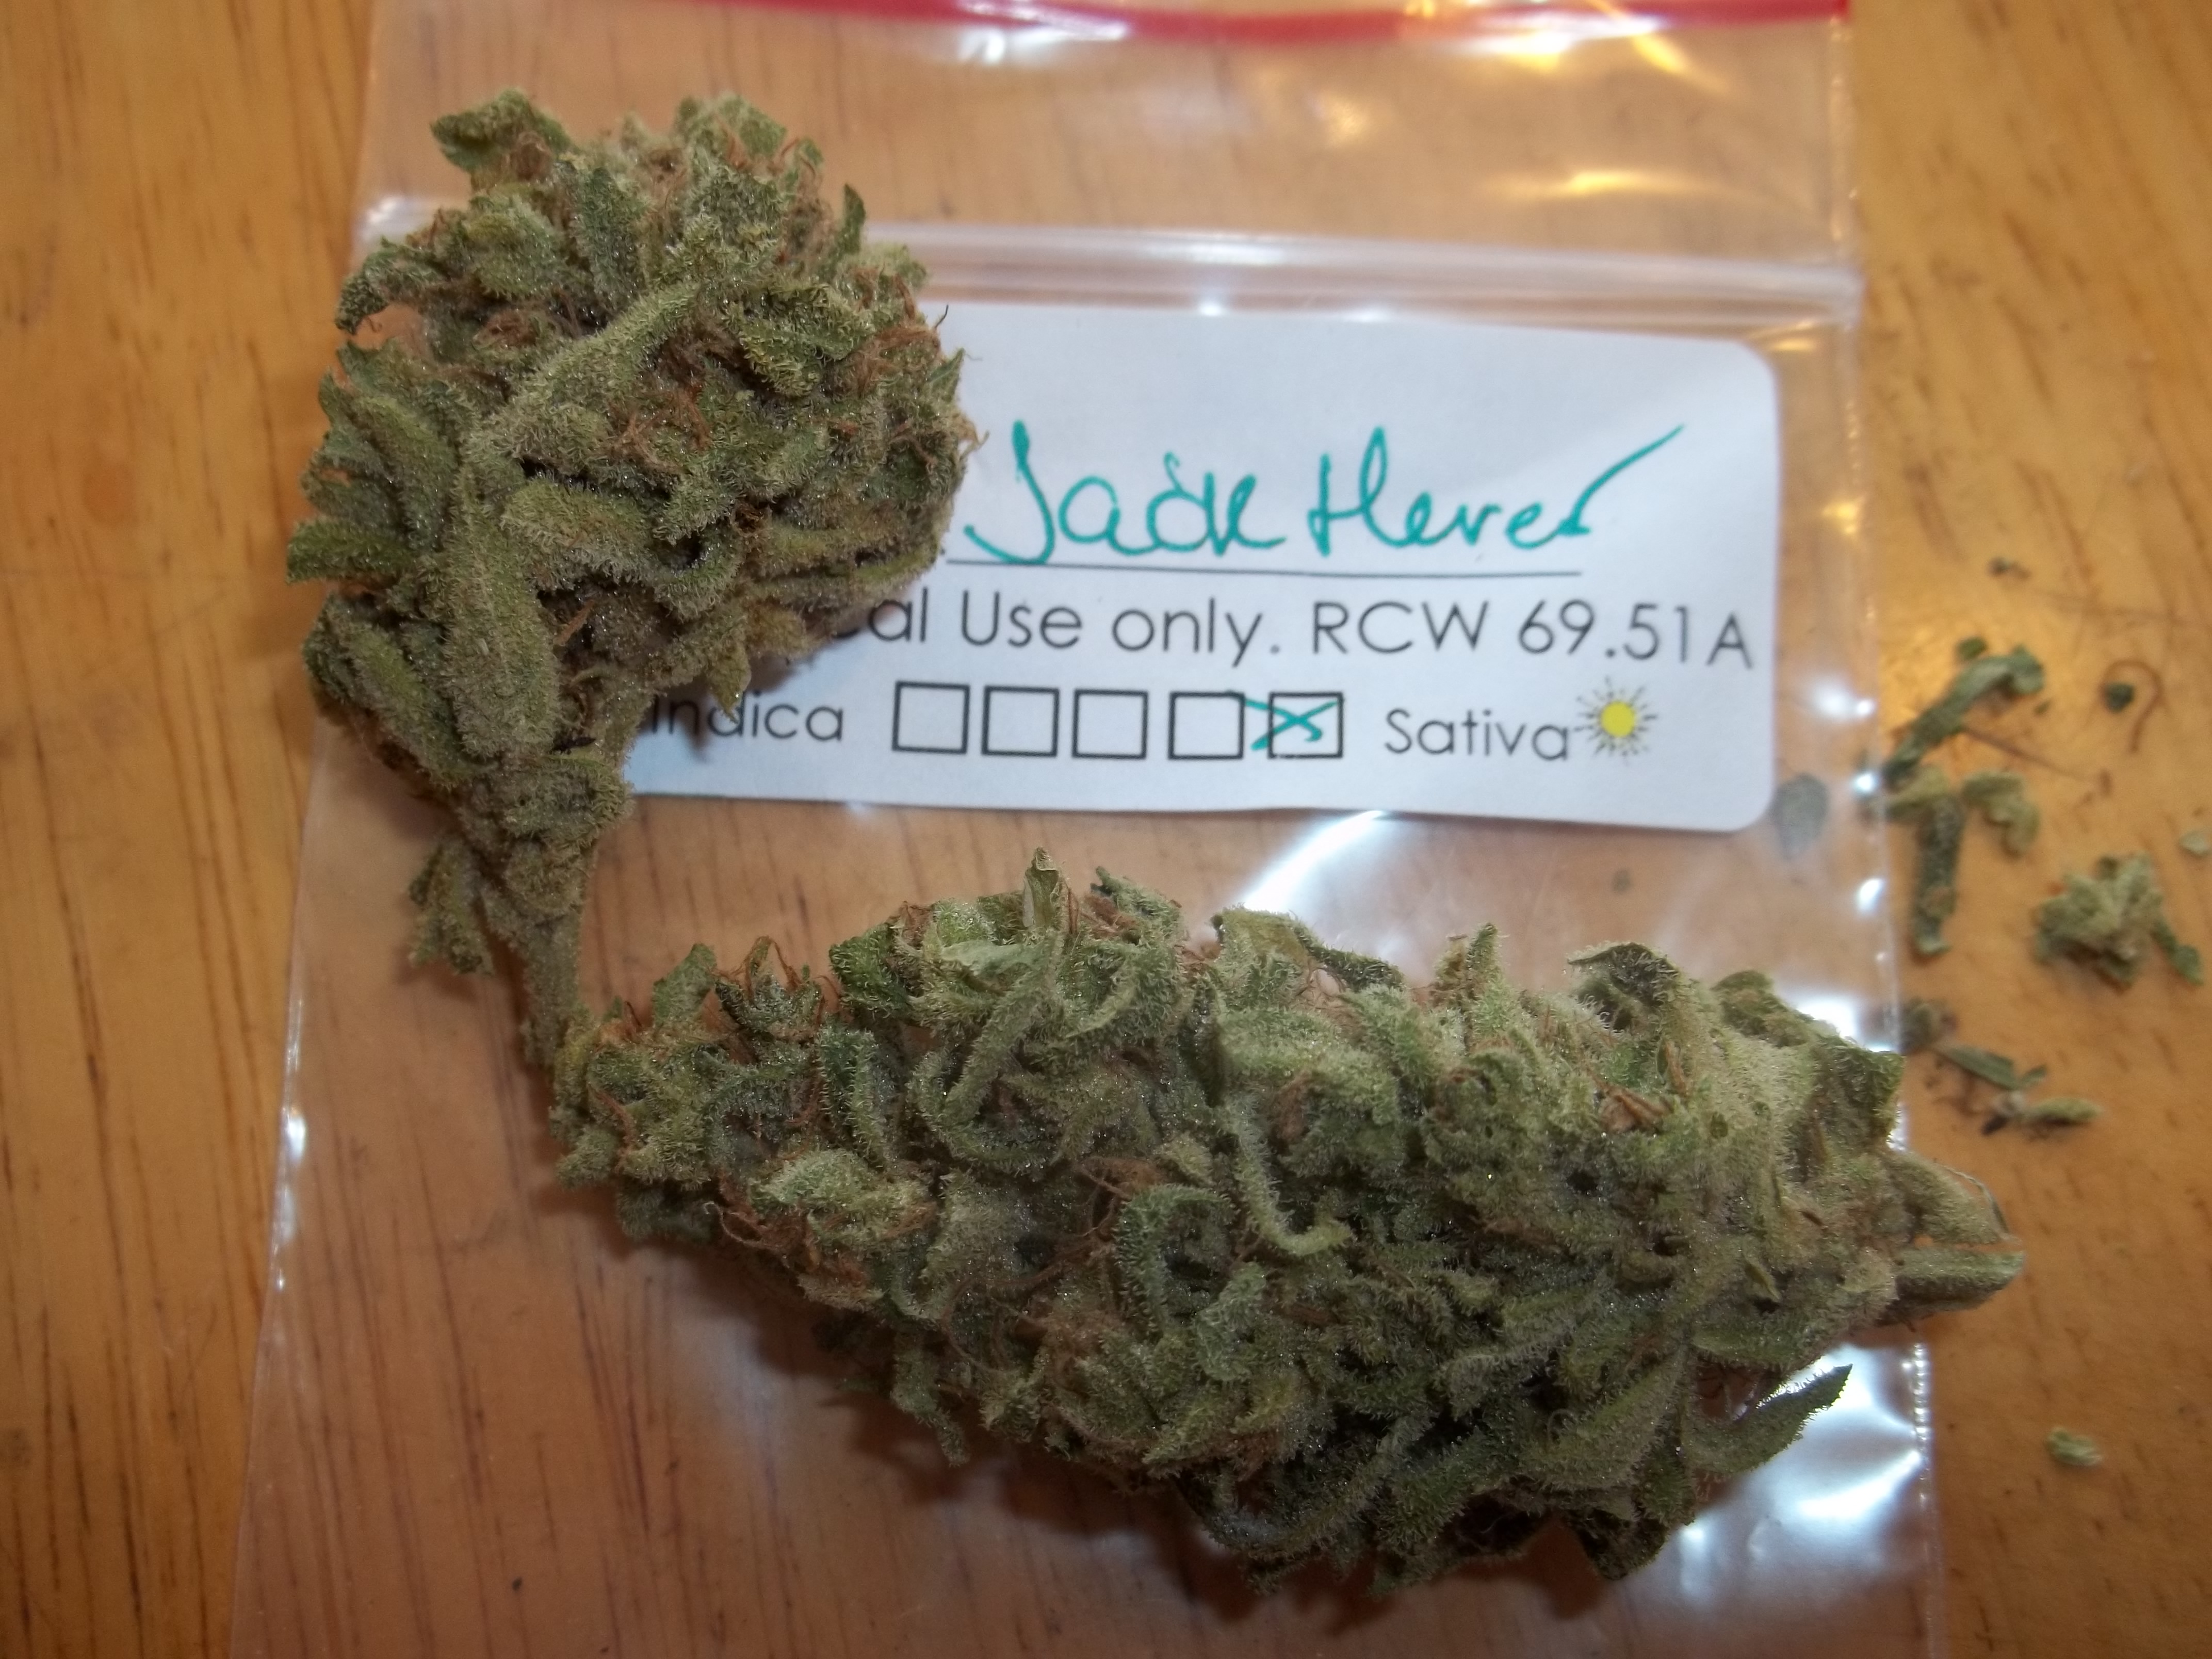 The Center for Palliative Care sells one of the best expressions of The dependable Jack Herer.